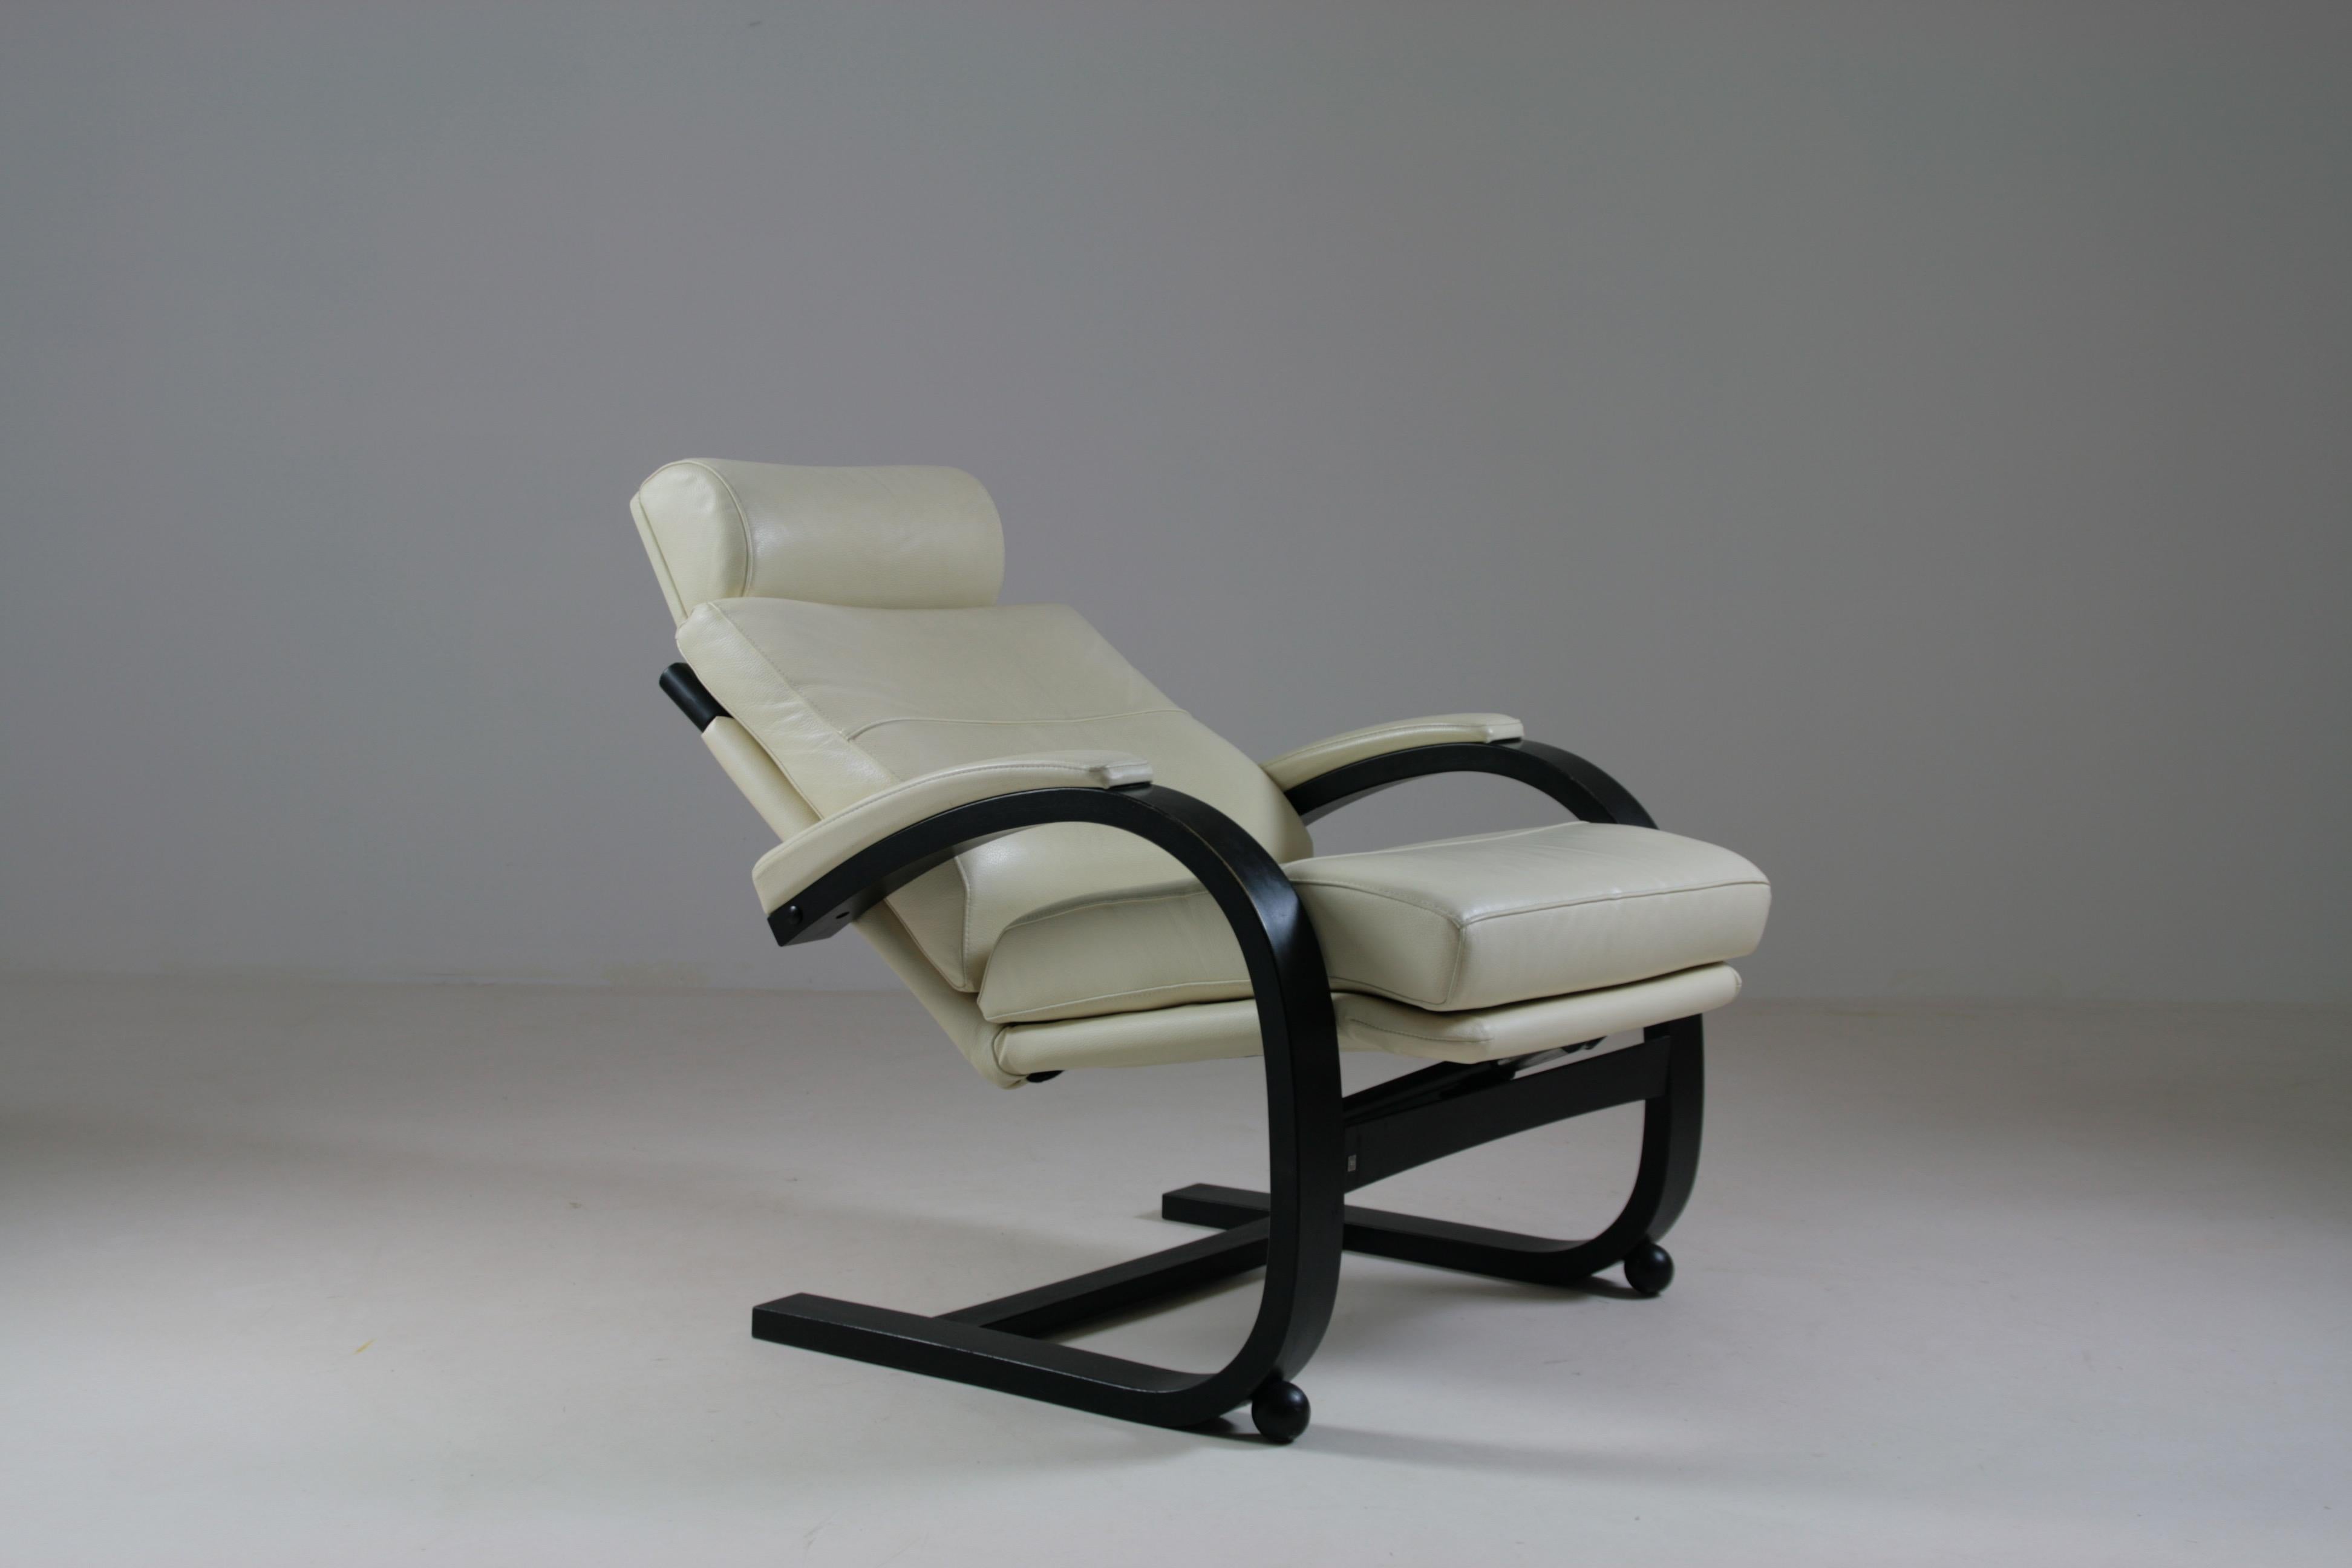 Nelo Swedish leather recliner armchair by åke fribyter For Sale 5